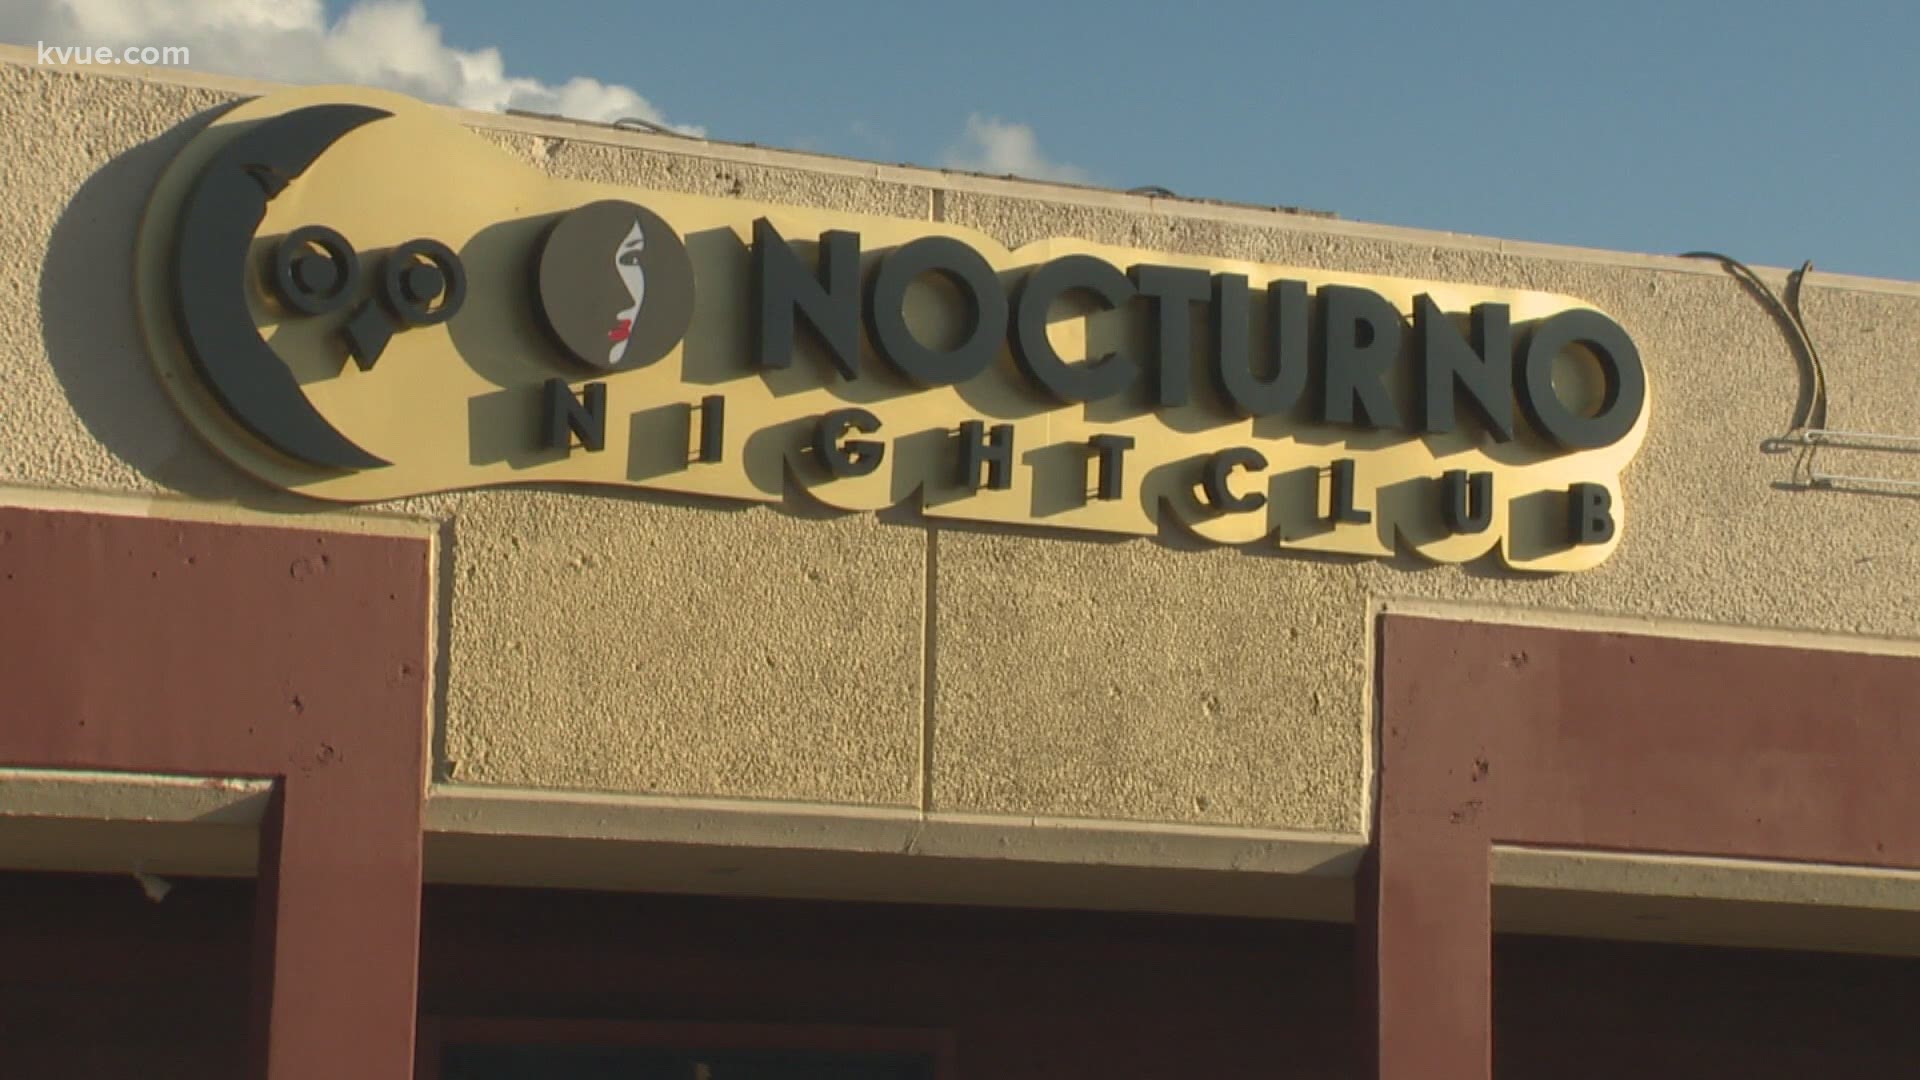 A North Austin nightclub reopened on Friday, despite State and local orders. But though the City has received multiple complaints, no violations have been reported.